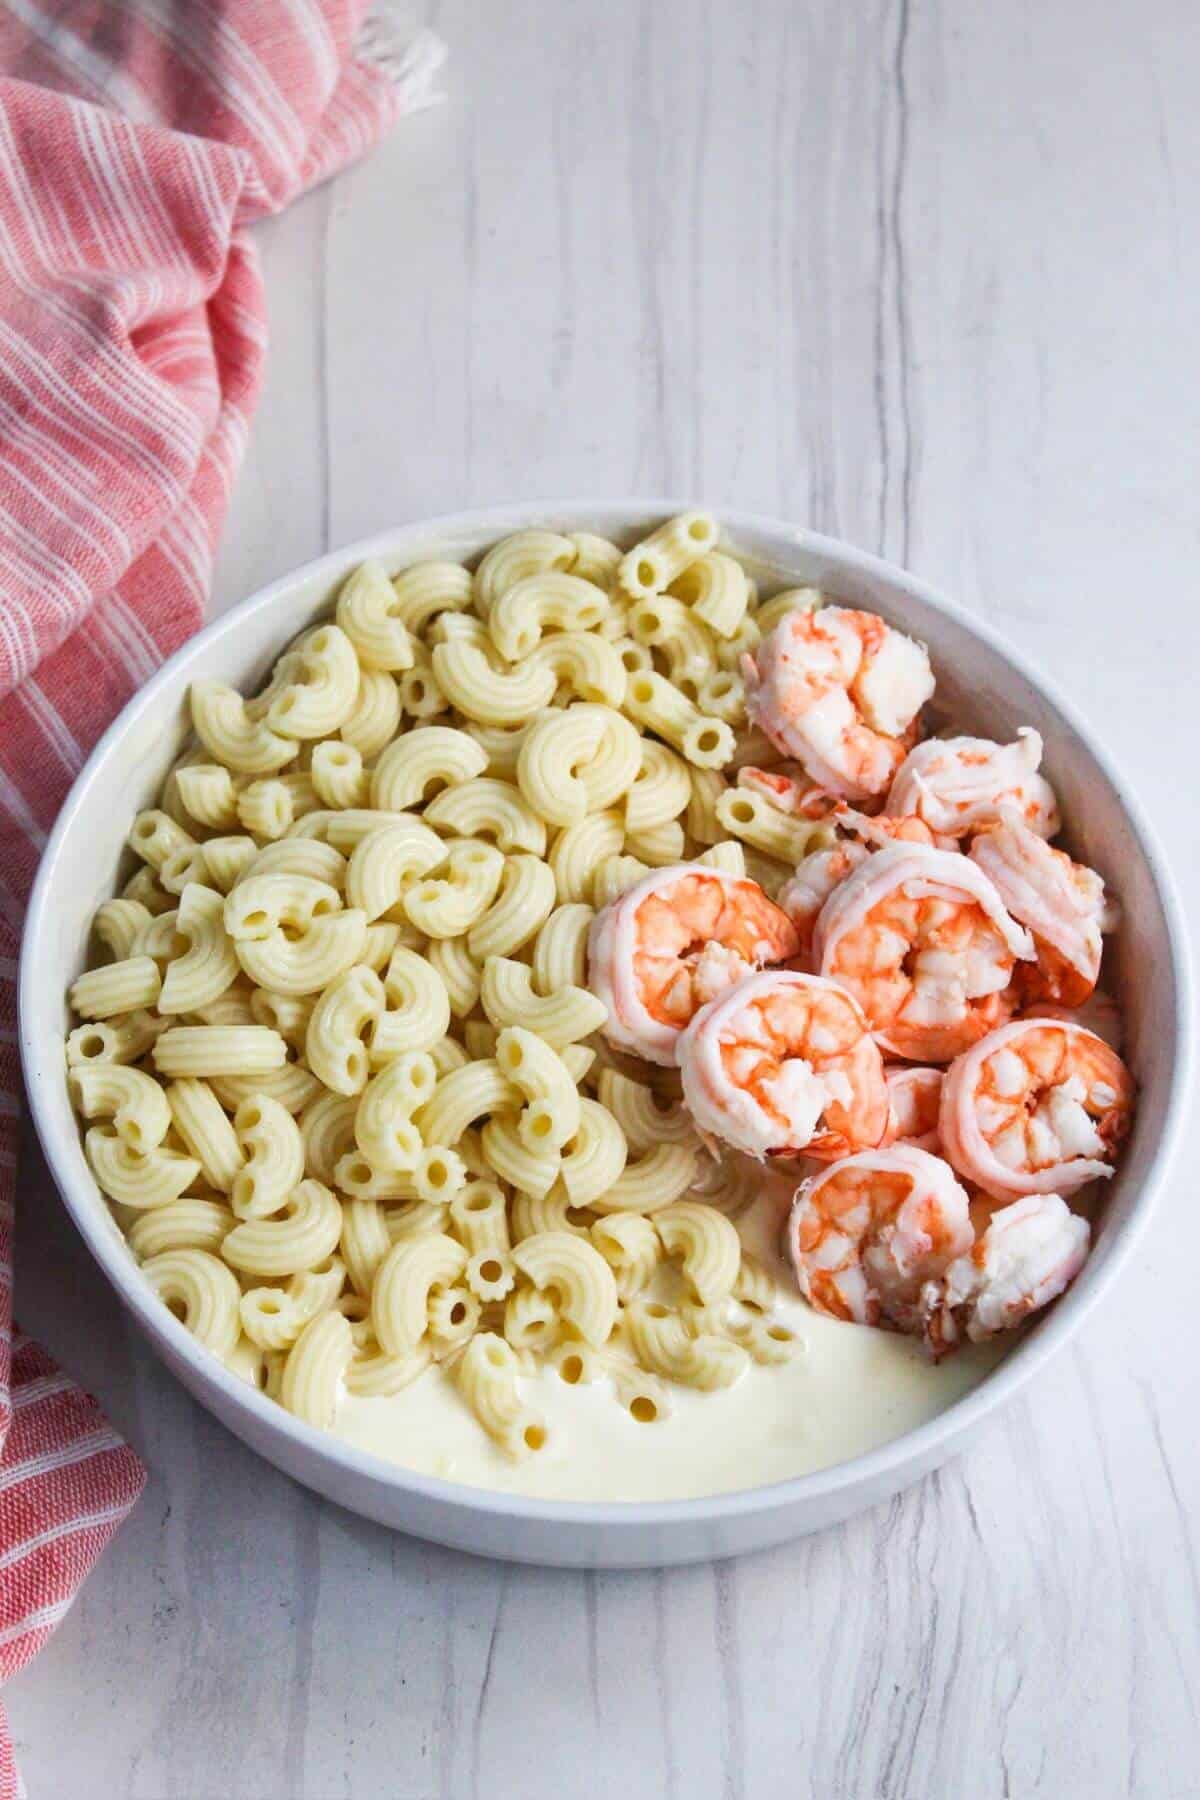 Macaroni and shrimp in a white bowl.